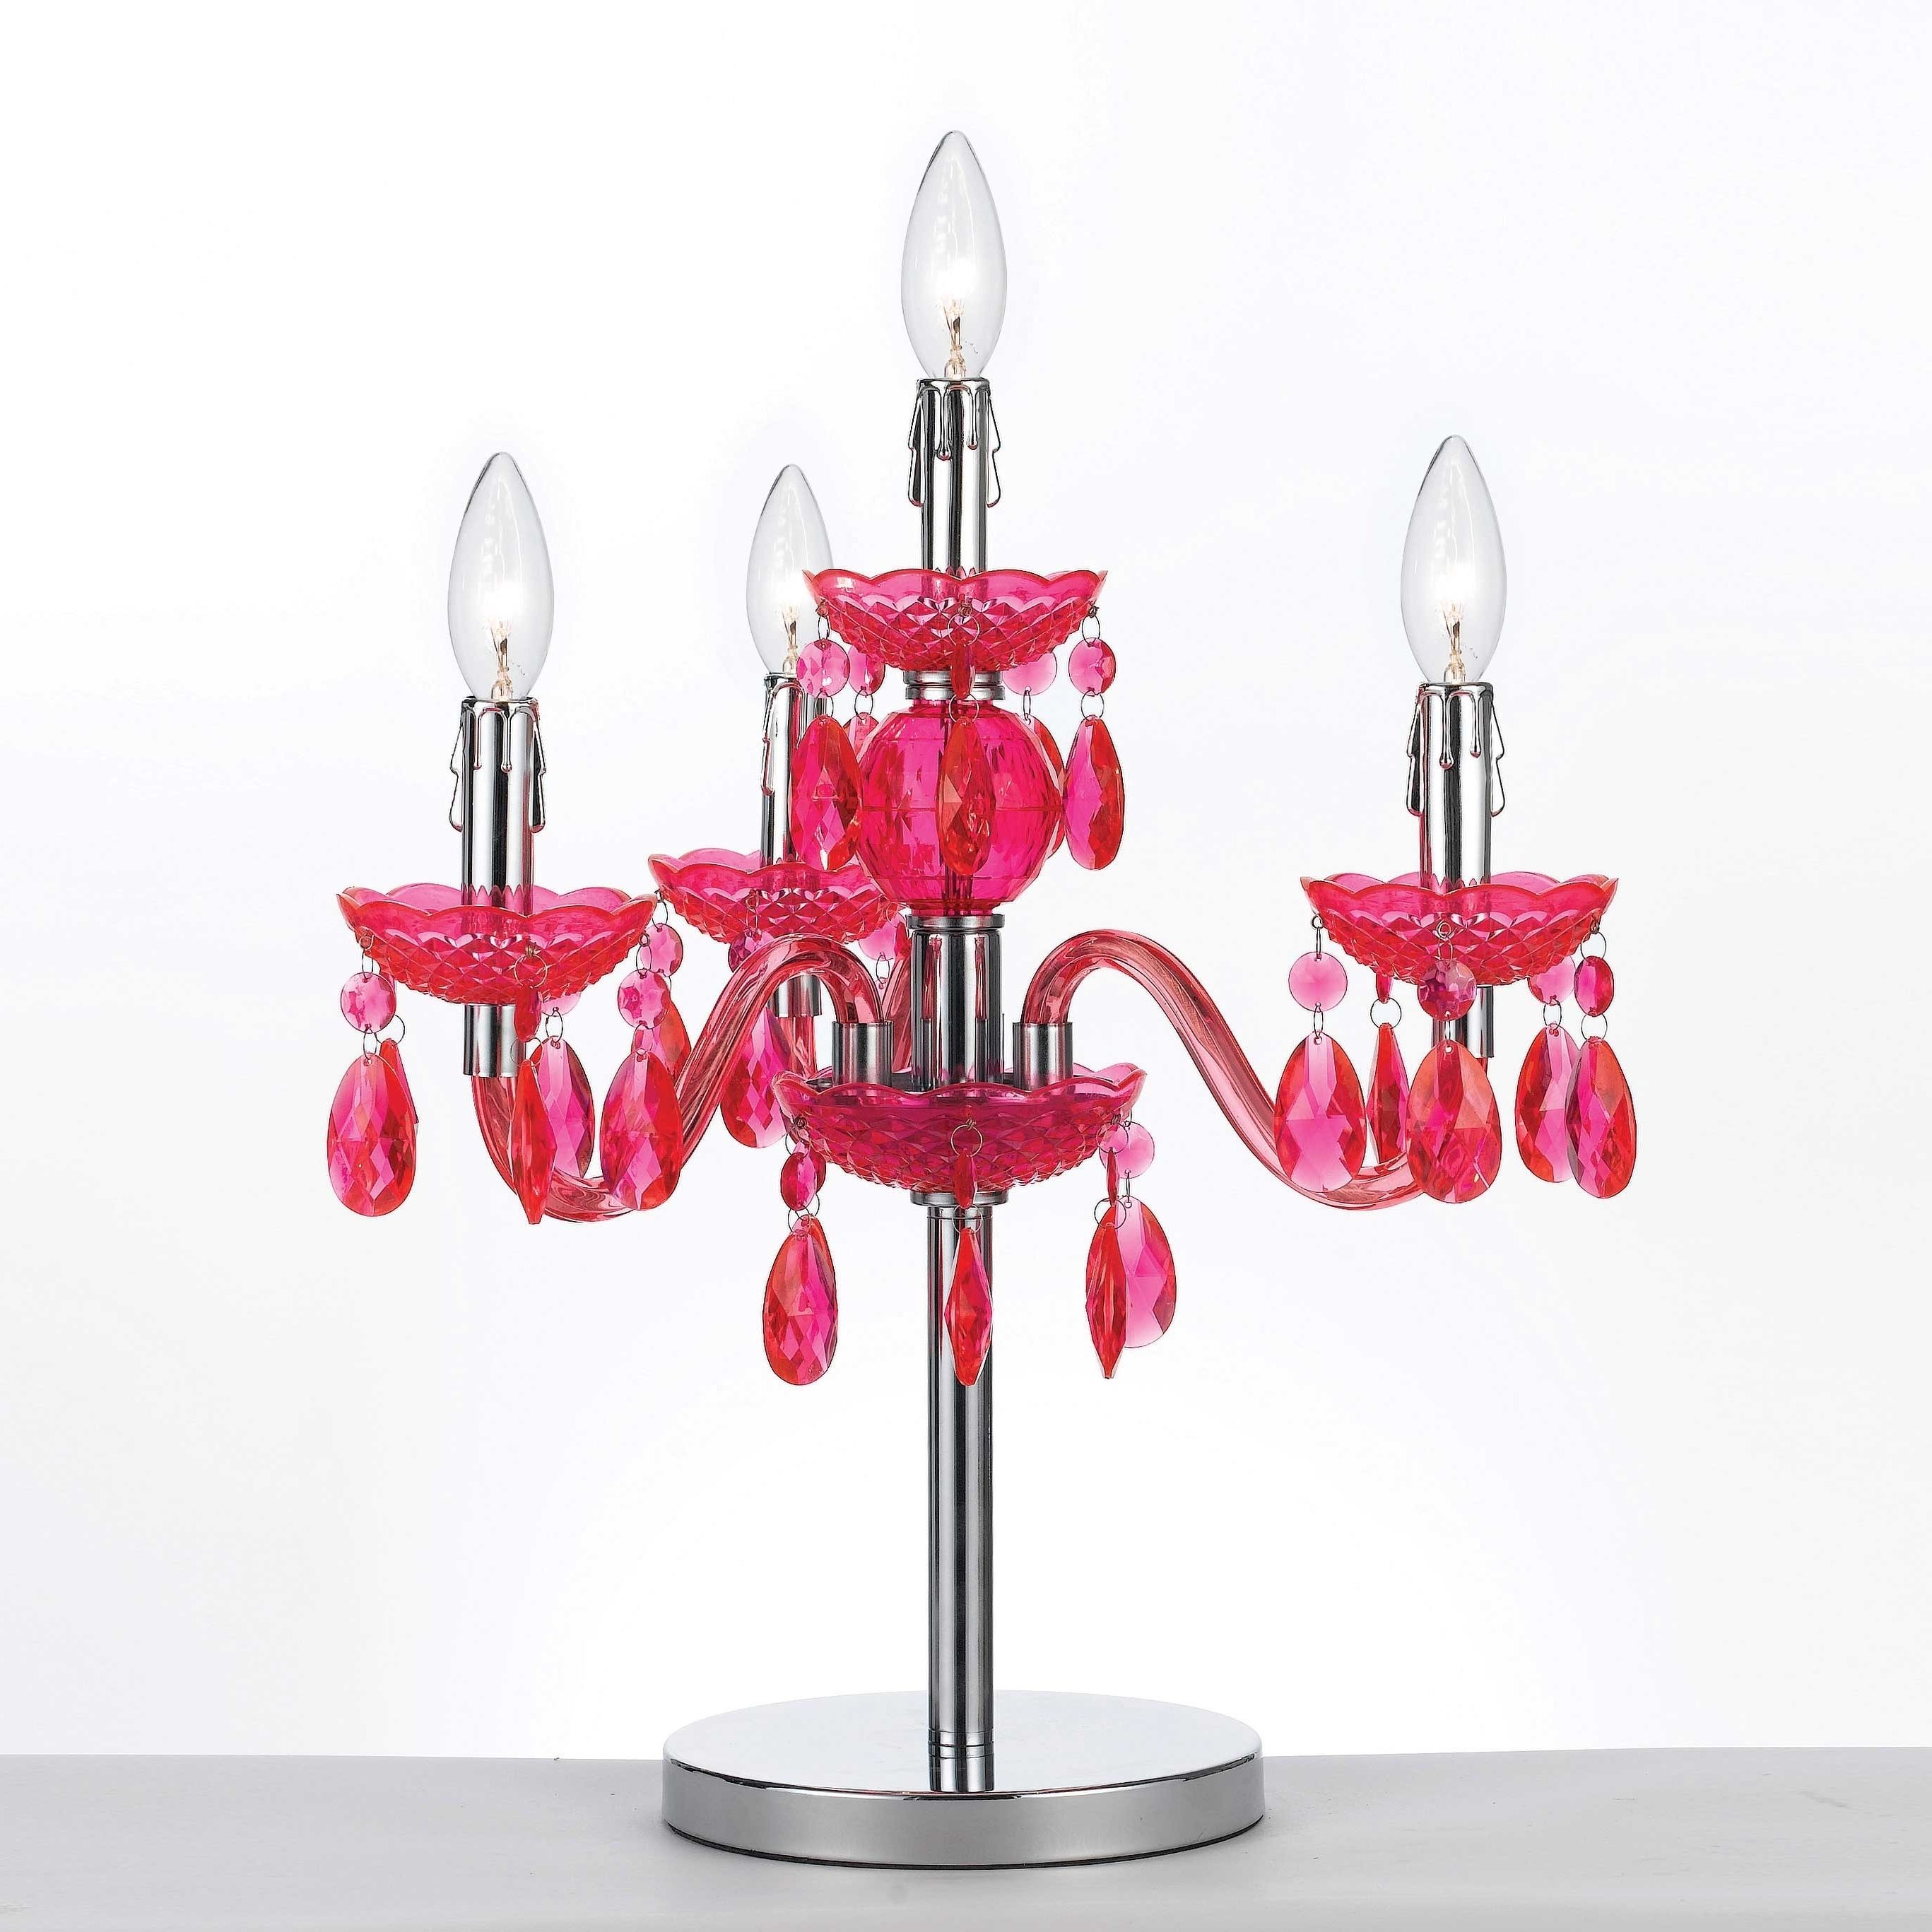 Mini Chandelier Table Lamps Throughout Latest Chandelier Style Table Lamps, Small Chandelier Table Lamp (View 7 of 20)